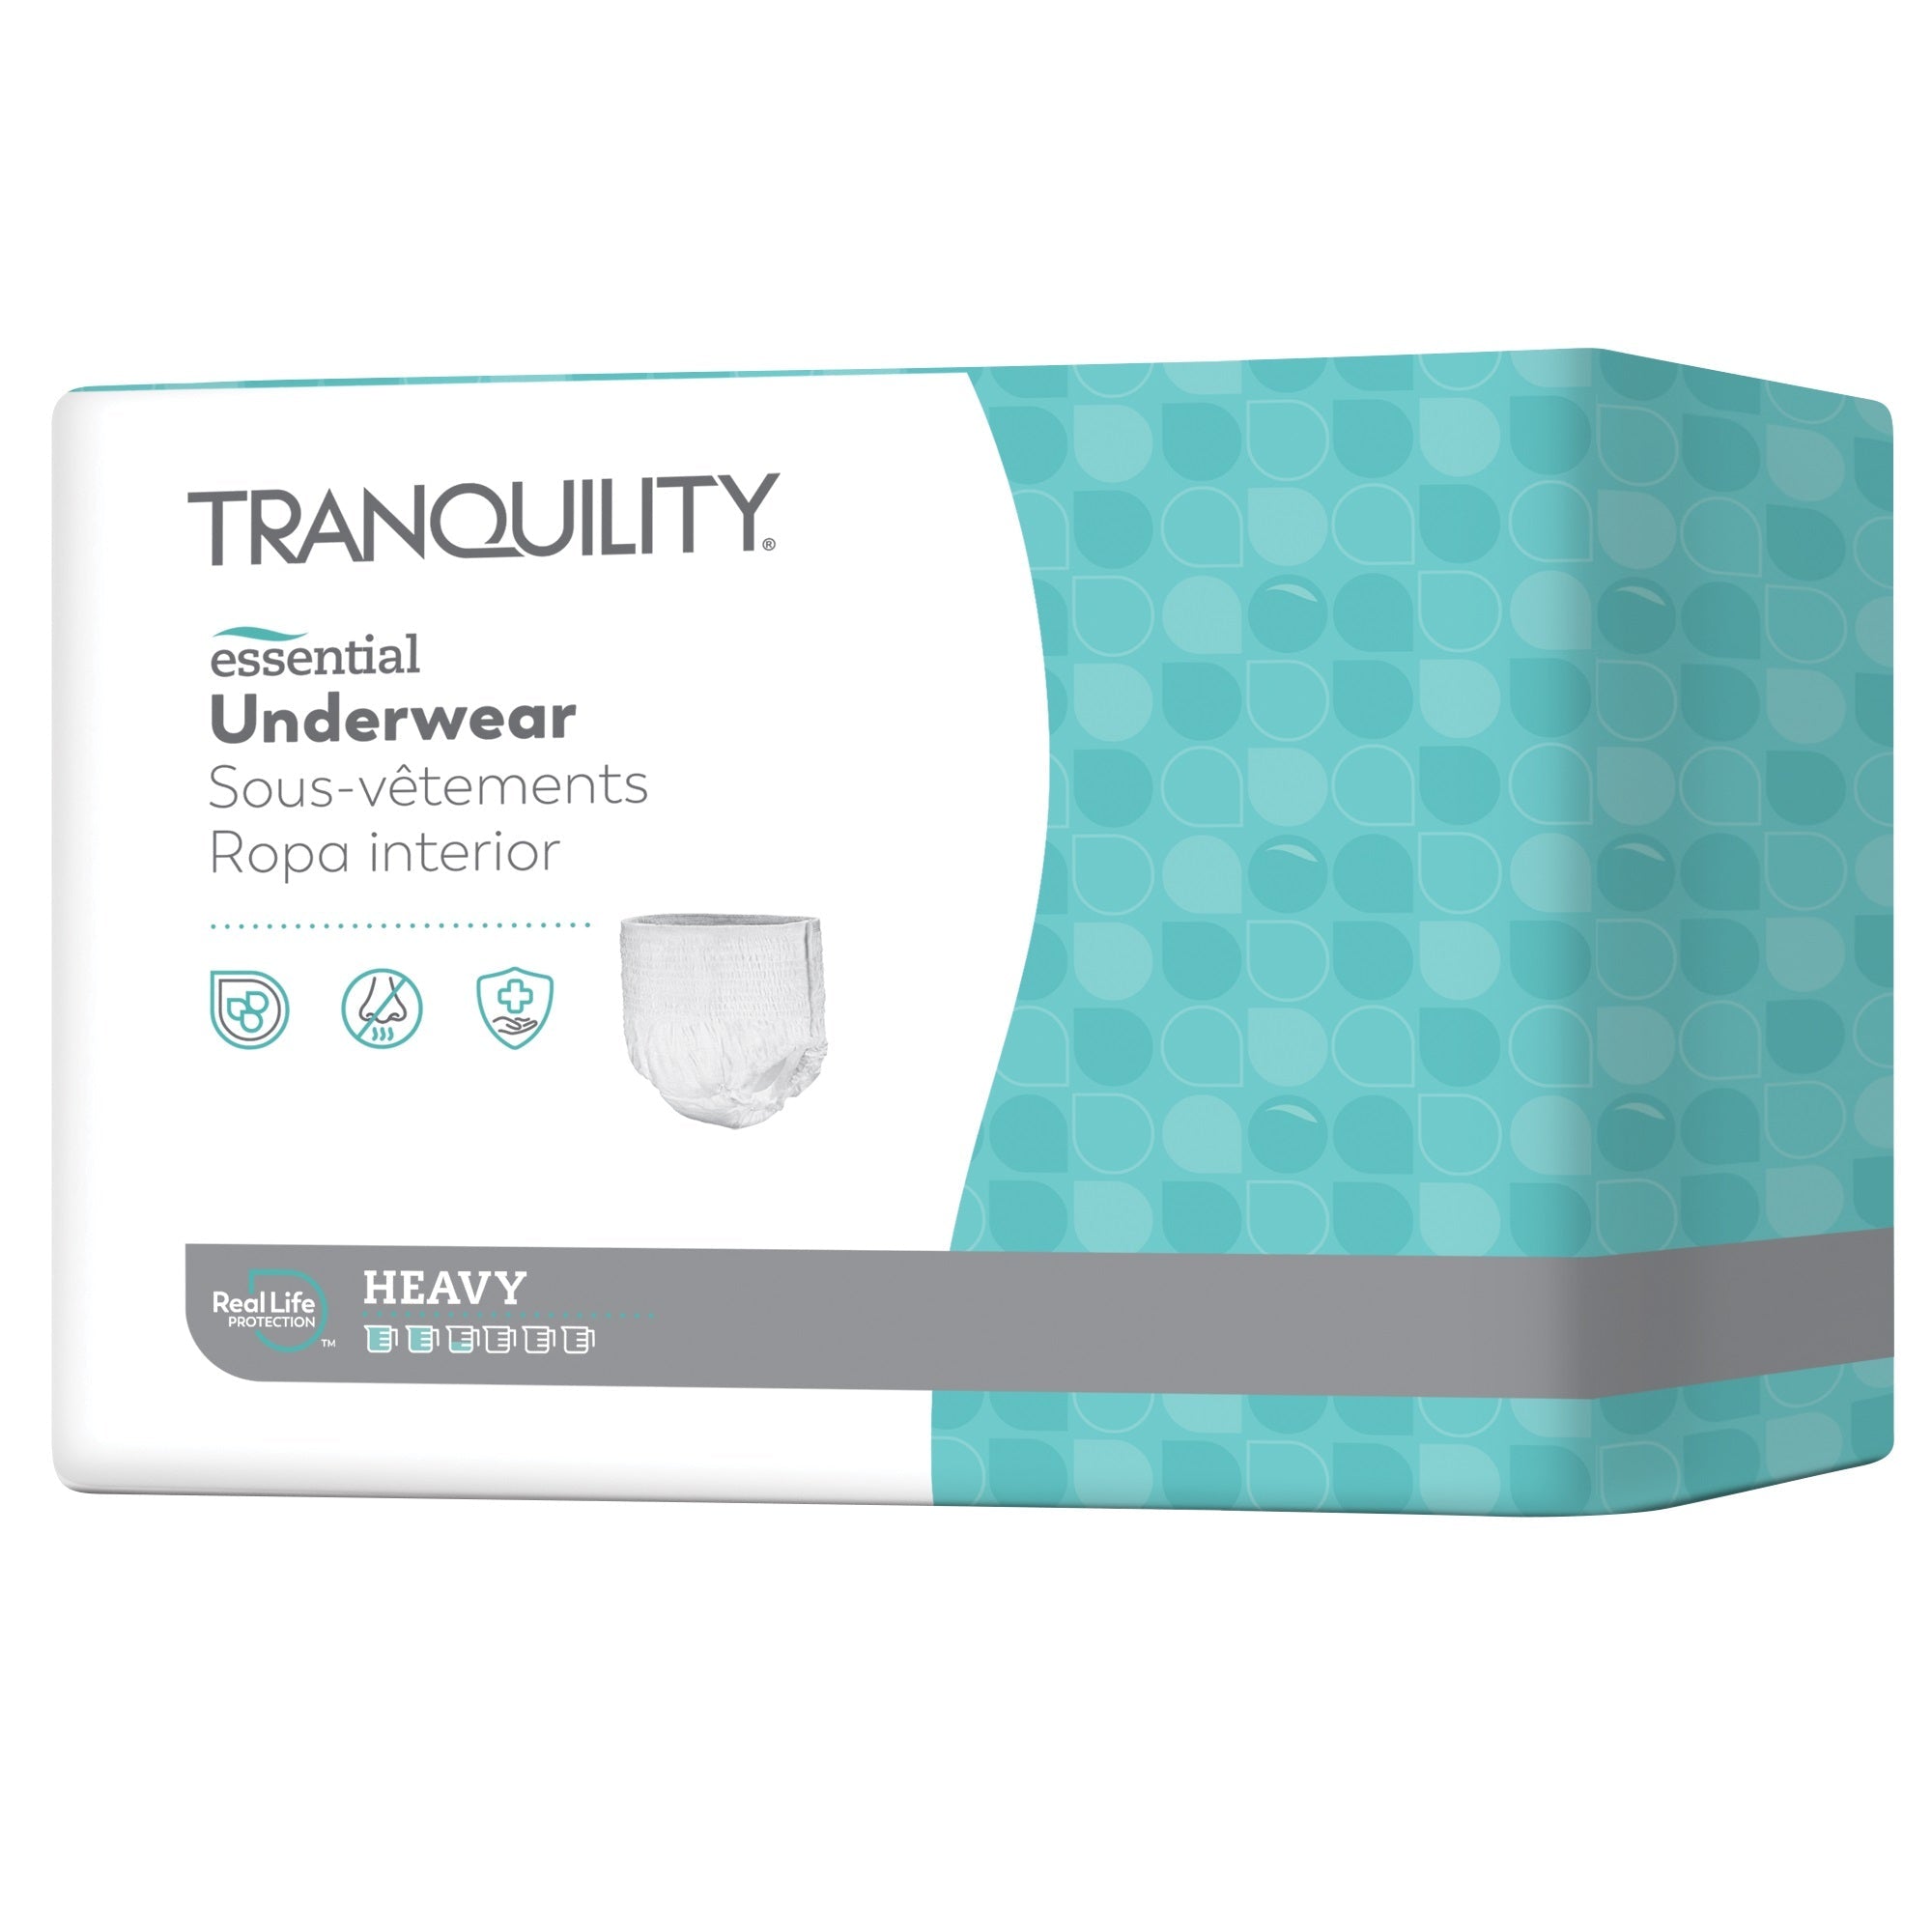 CA/88 - Tranquility® Select® Disposable Absorbent Underwear, 19 oz Fluid Capacity, Small (22" to 36" Waist/Hip, 80 to 125 lb) - Possible sub for PU2650 - Best Buy Medical Supplies